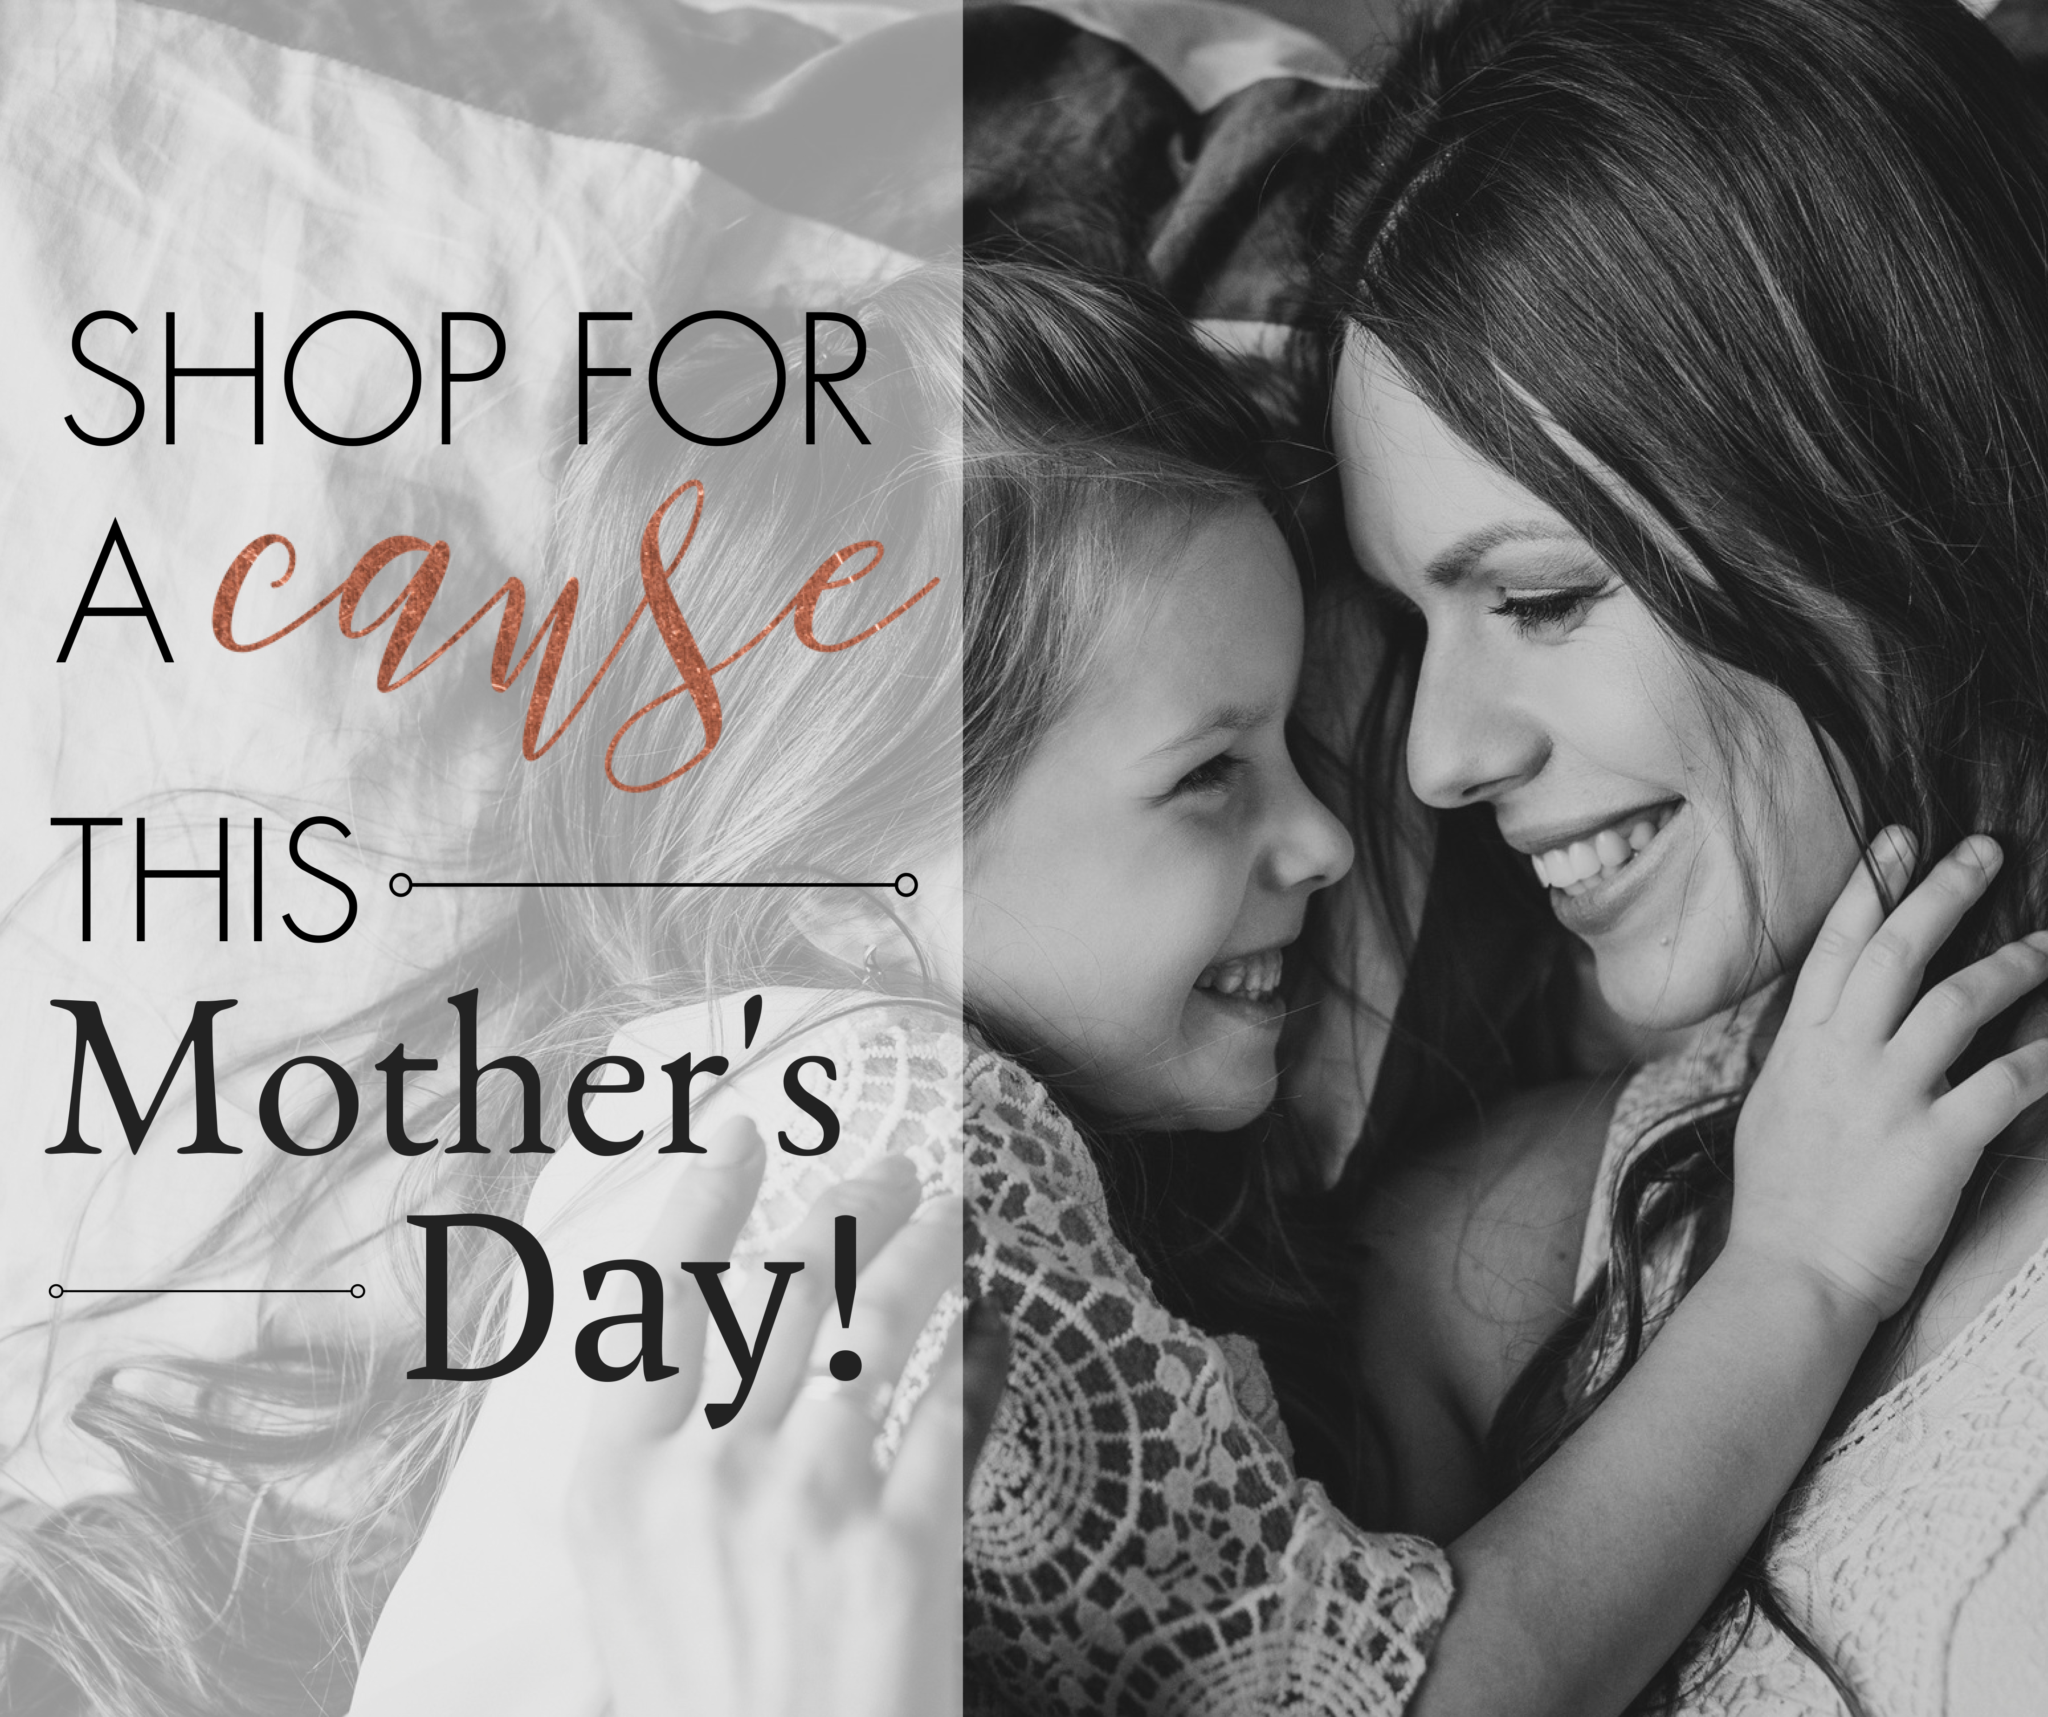 Shop For A Cause This Mother’s Day